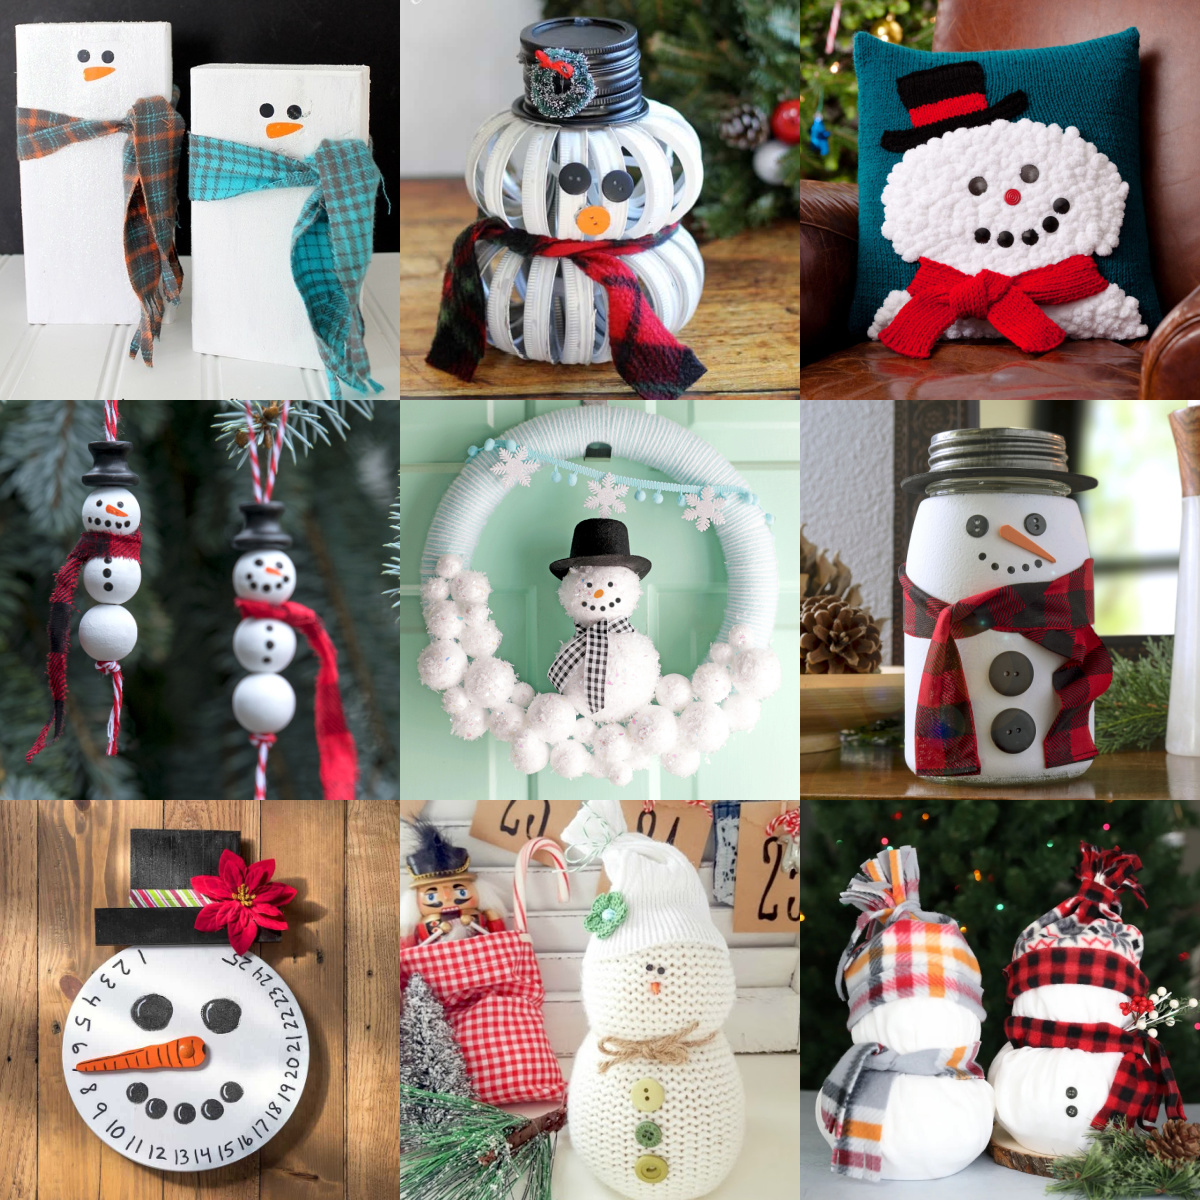 Snowman Crafts For Adults This Winter - Diy Candy